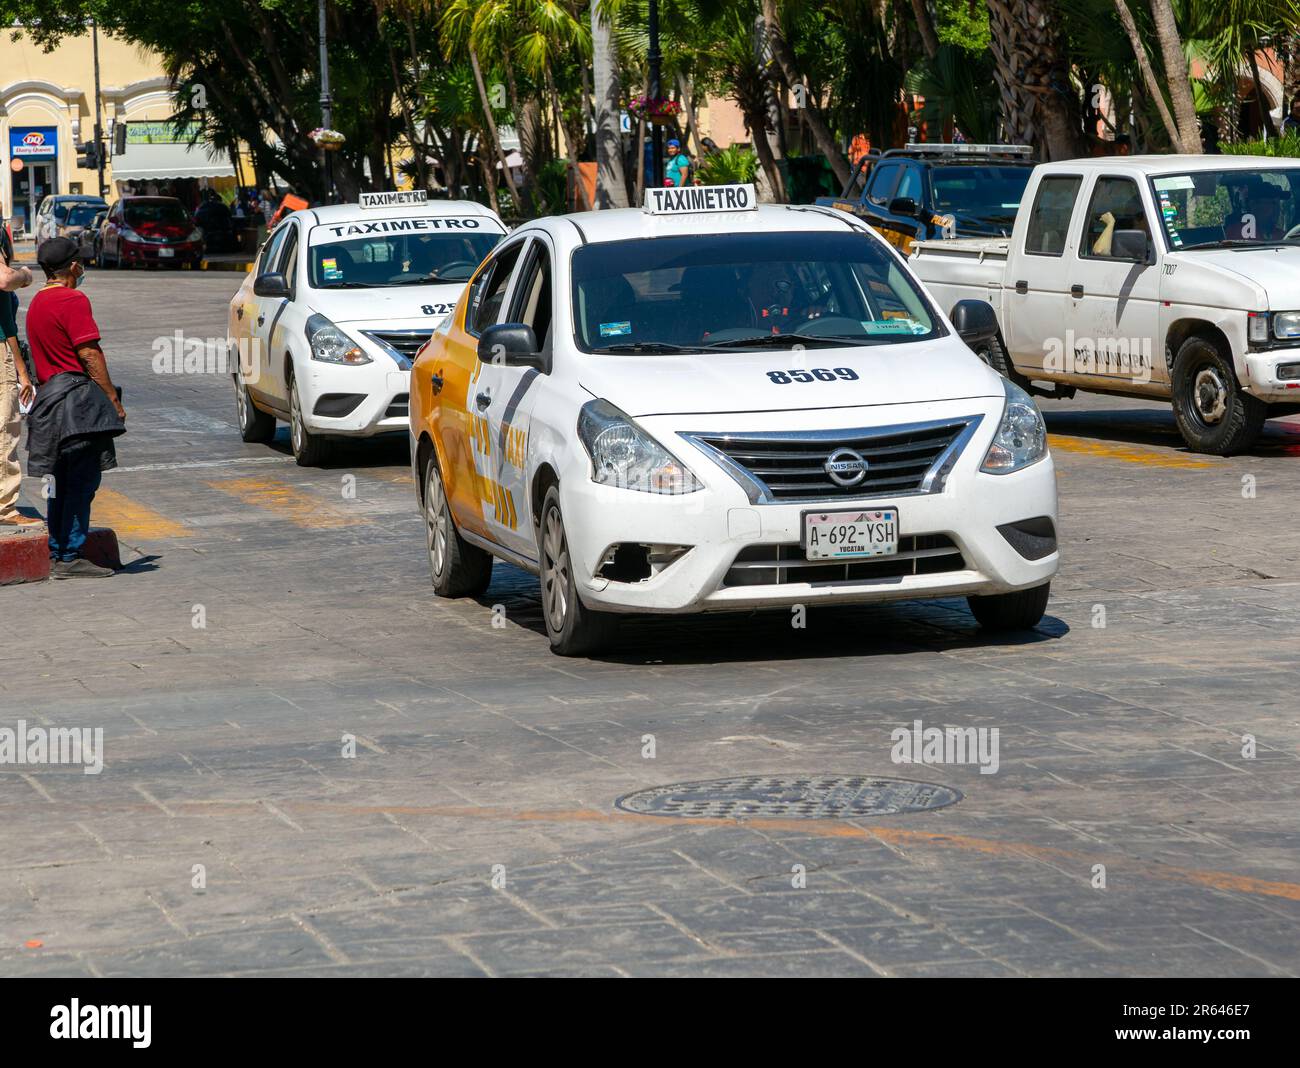 Taximeter metered taxi cars in city centre, Merida, Yucatan State, Mexico Stock Photo